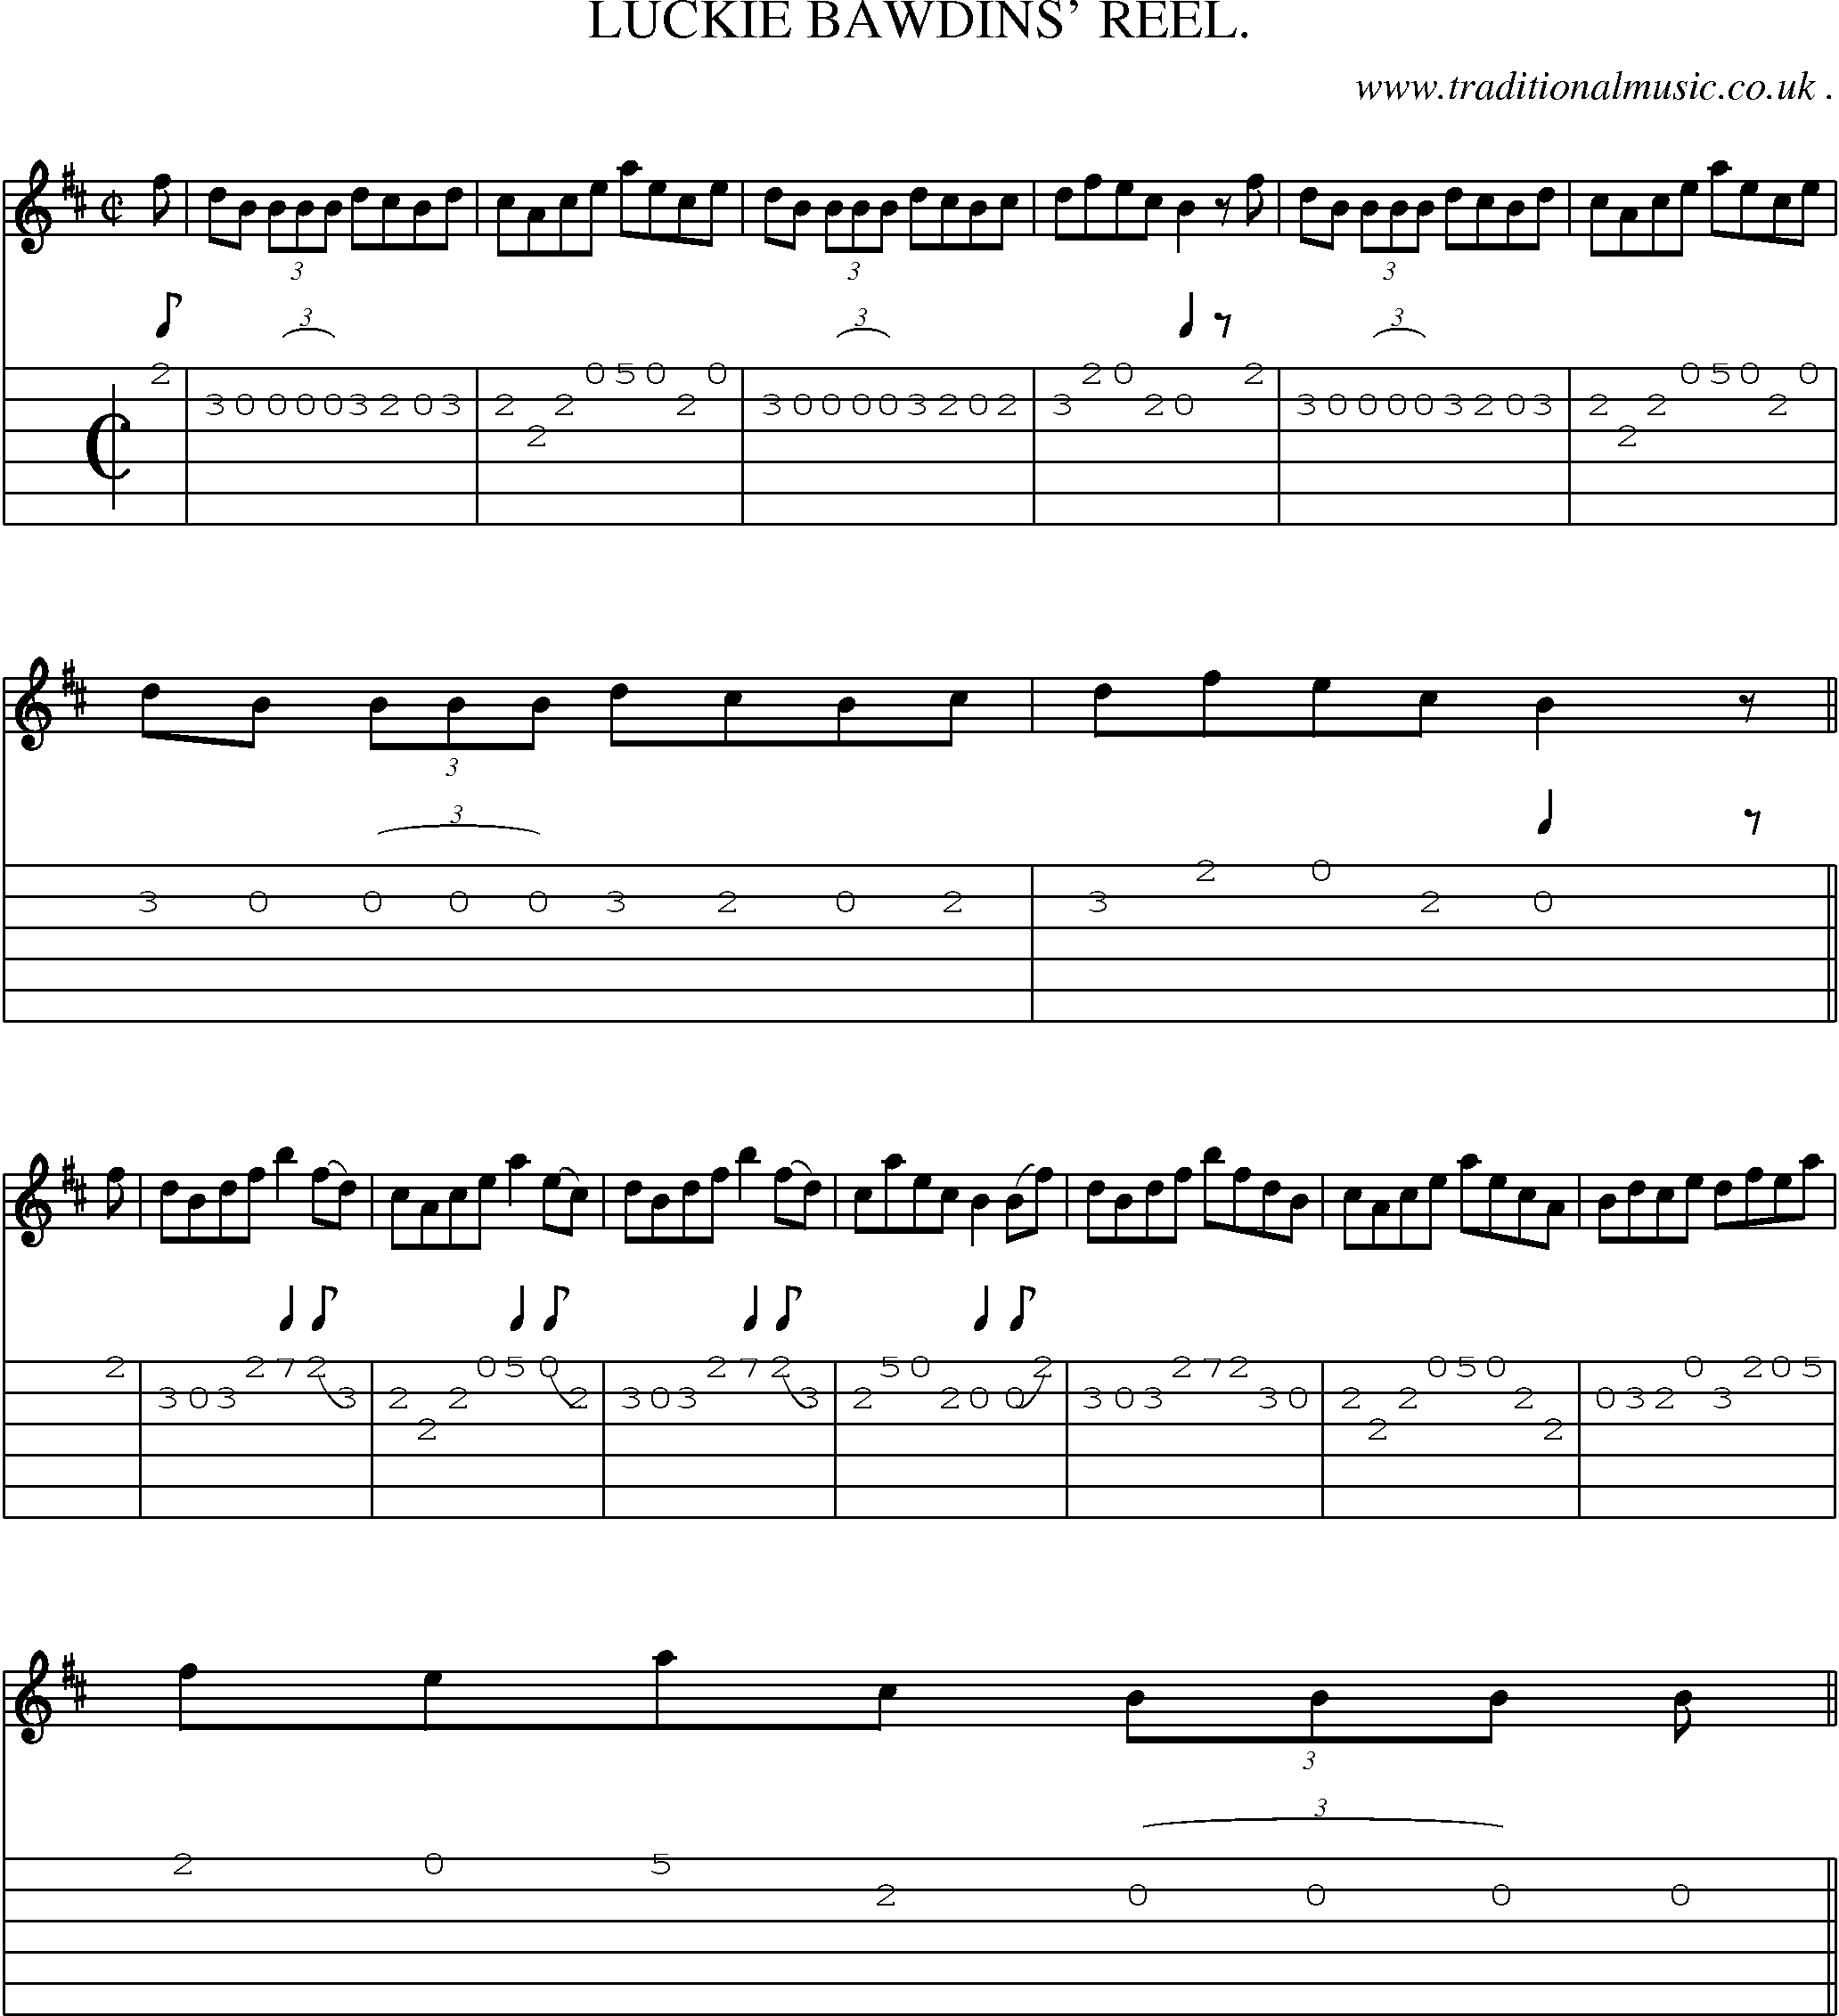 Sheet-Music and Guitar Tabs for Luckie Bawdins Reel